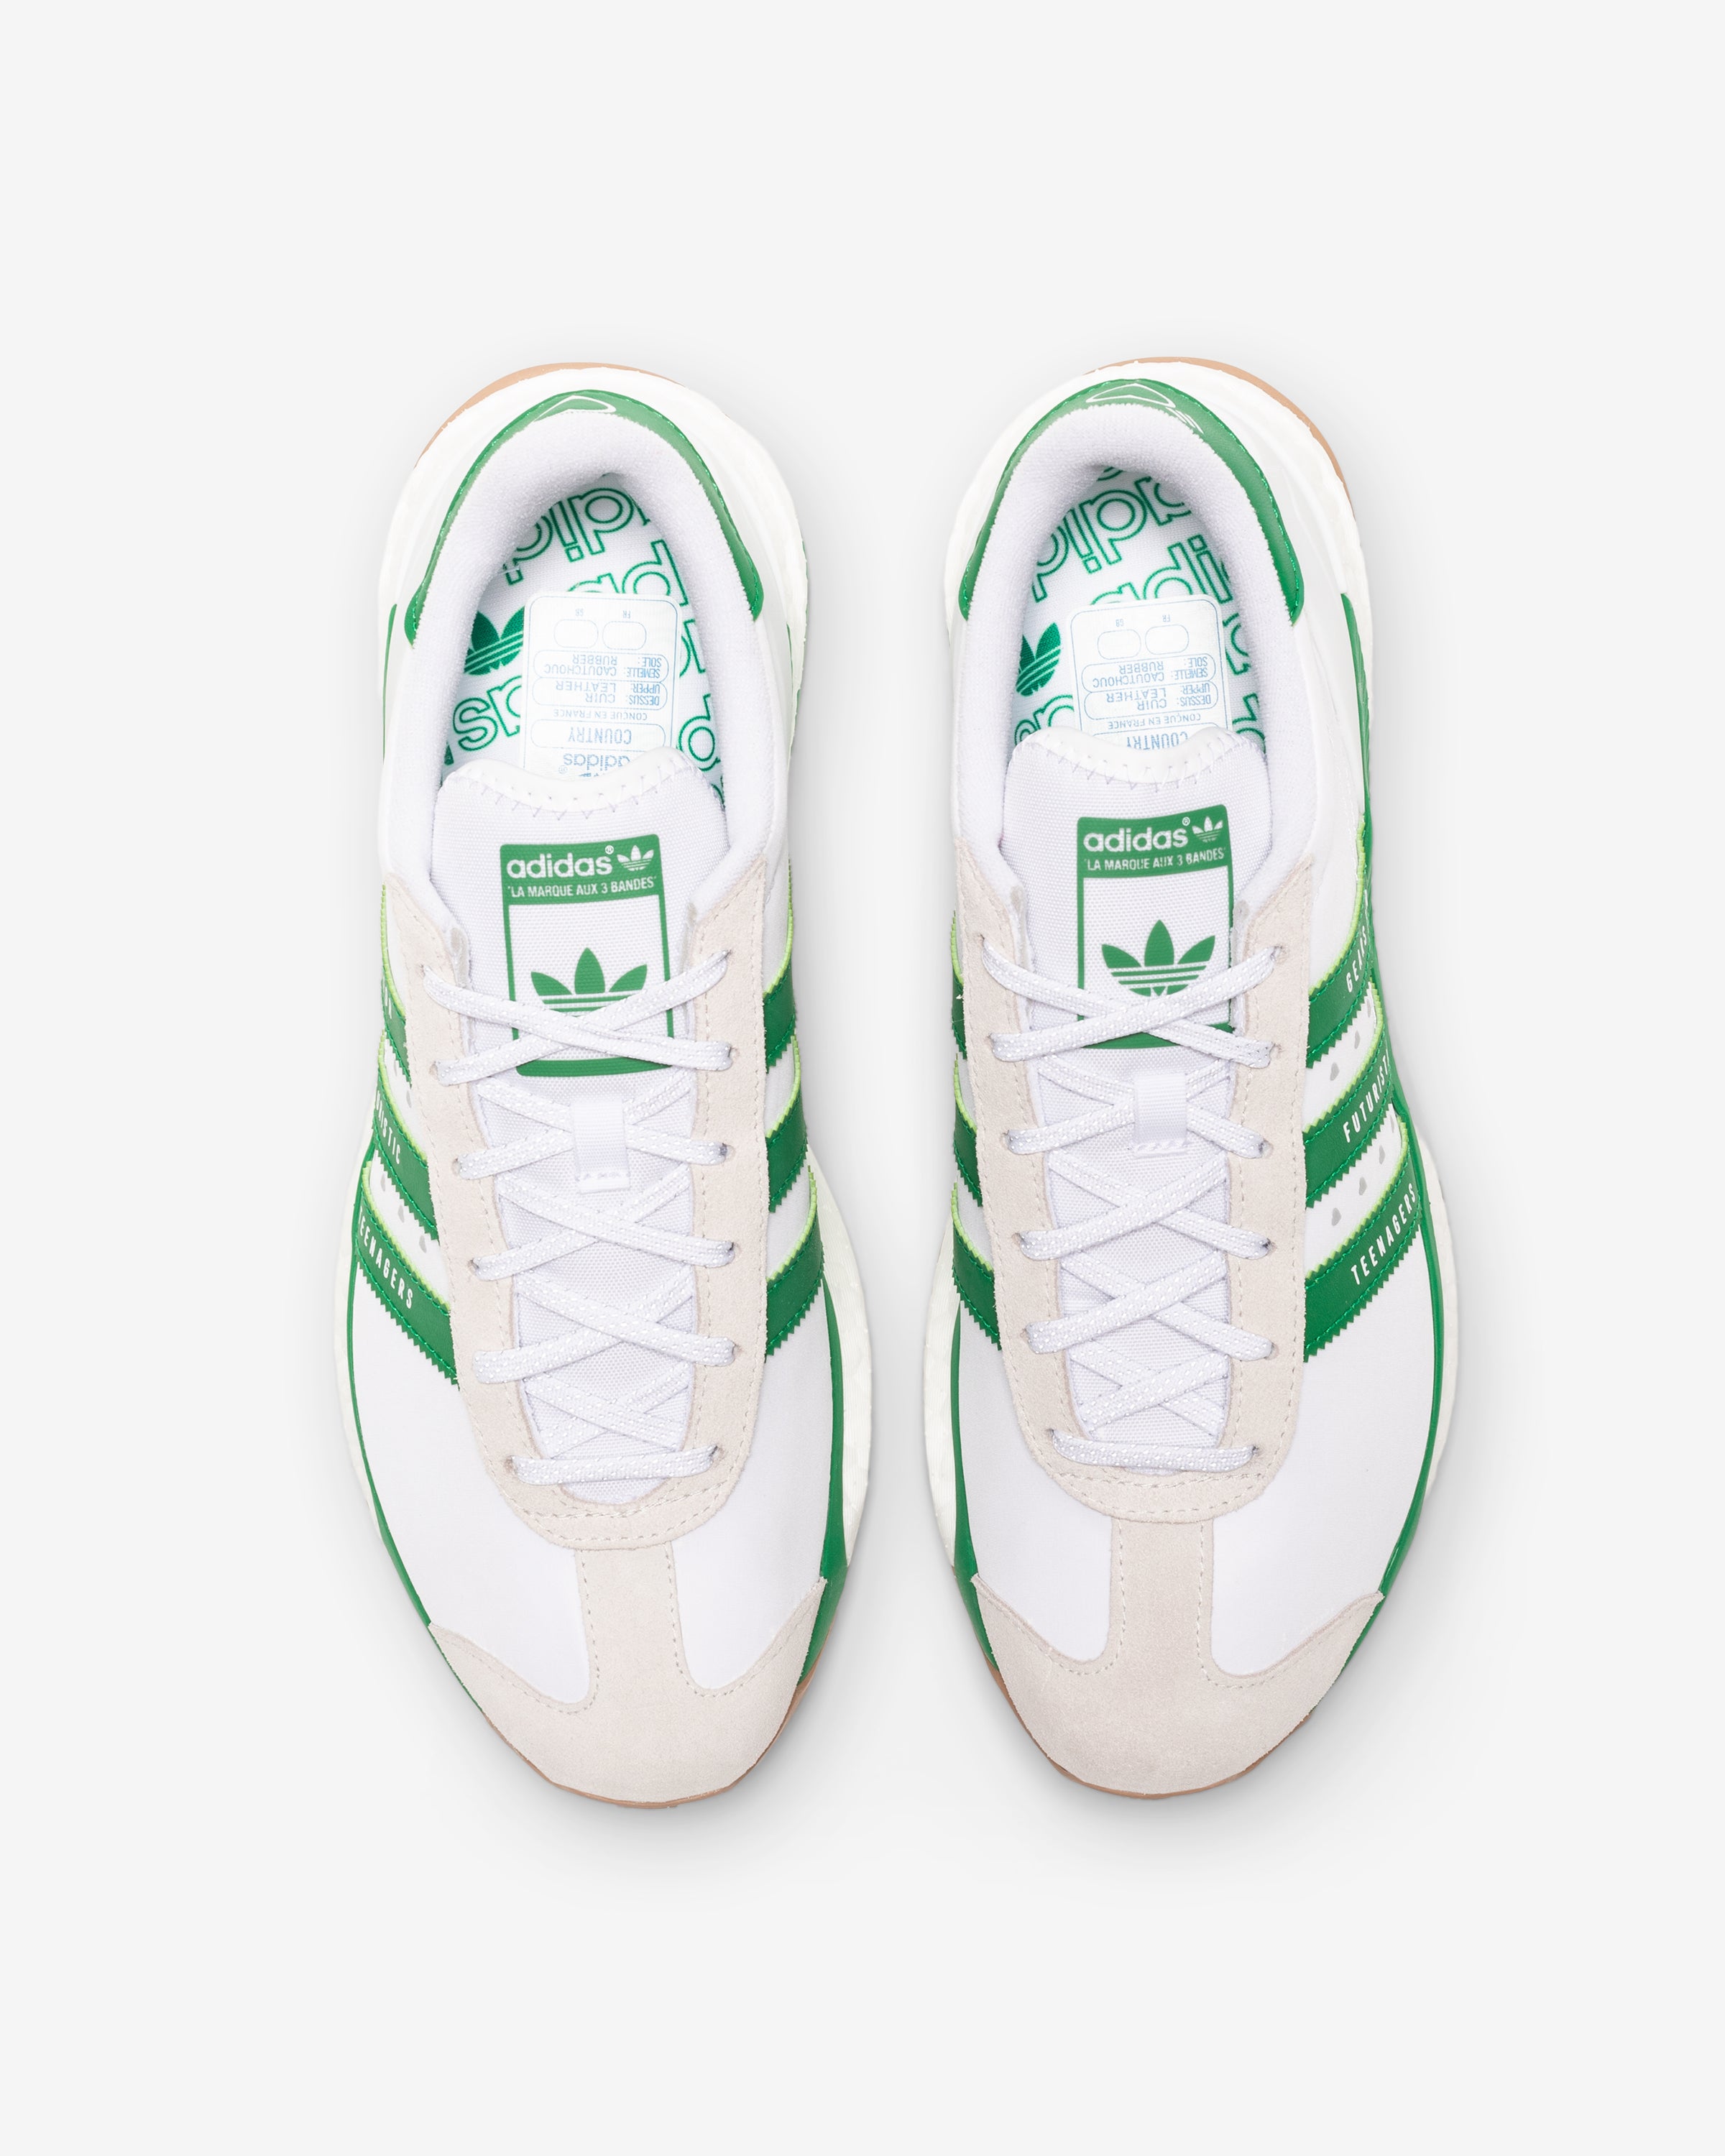 ADIDAS X HUMAN MADE COUNTRY FREE HIKER - GREEN – Undefeated